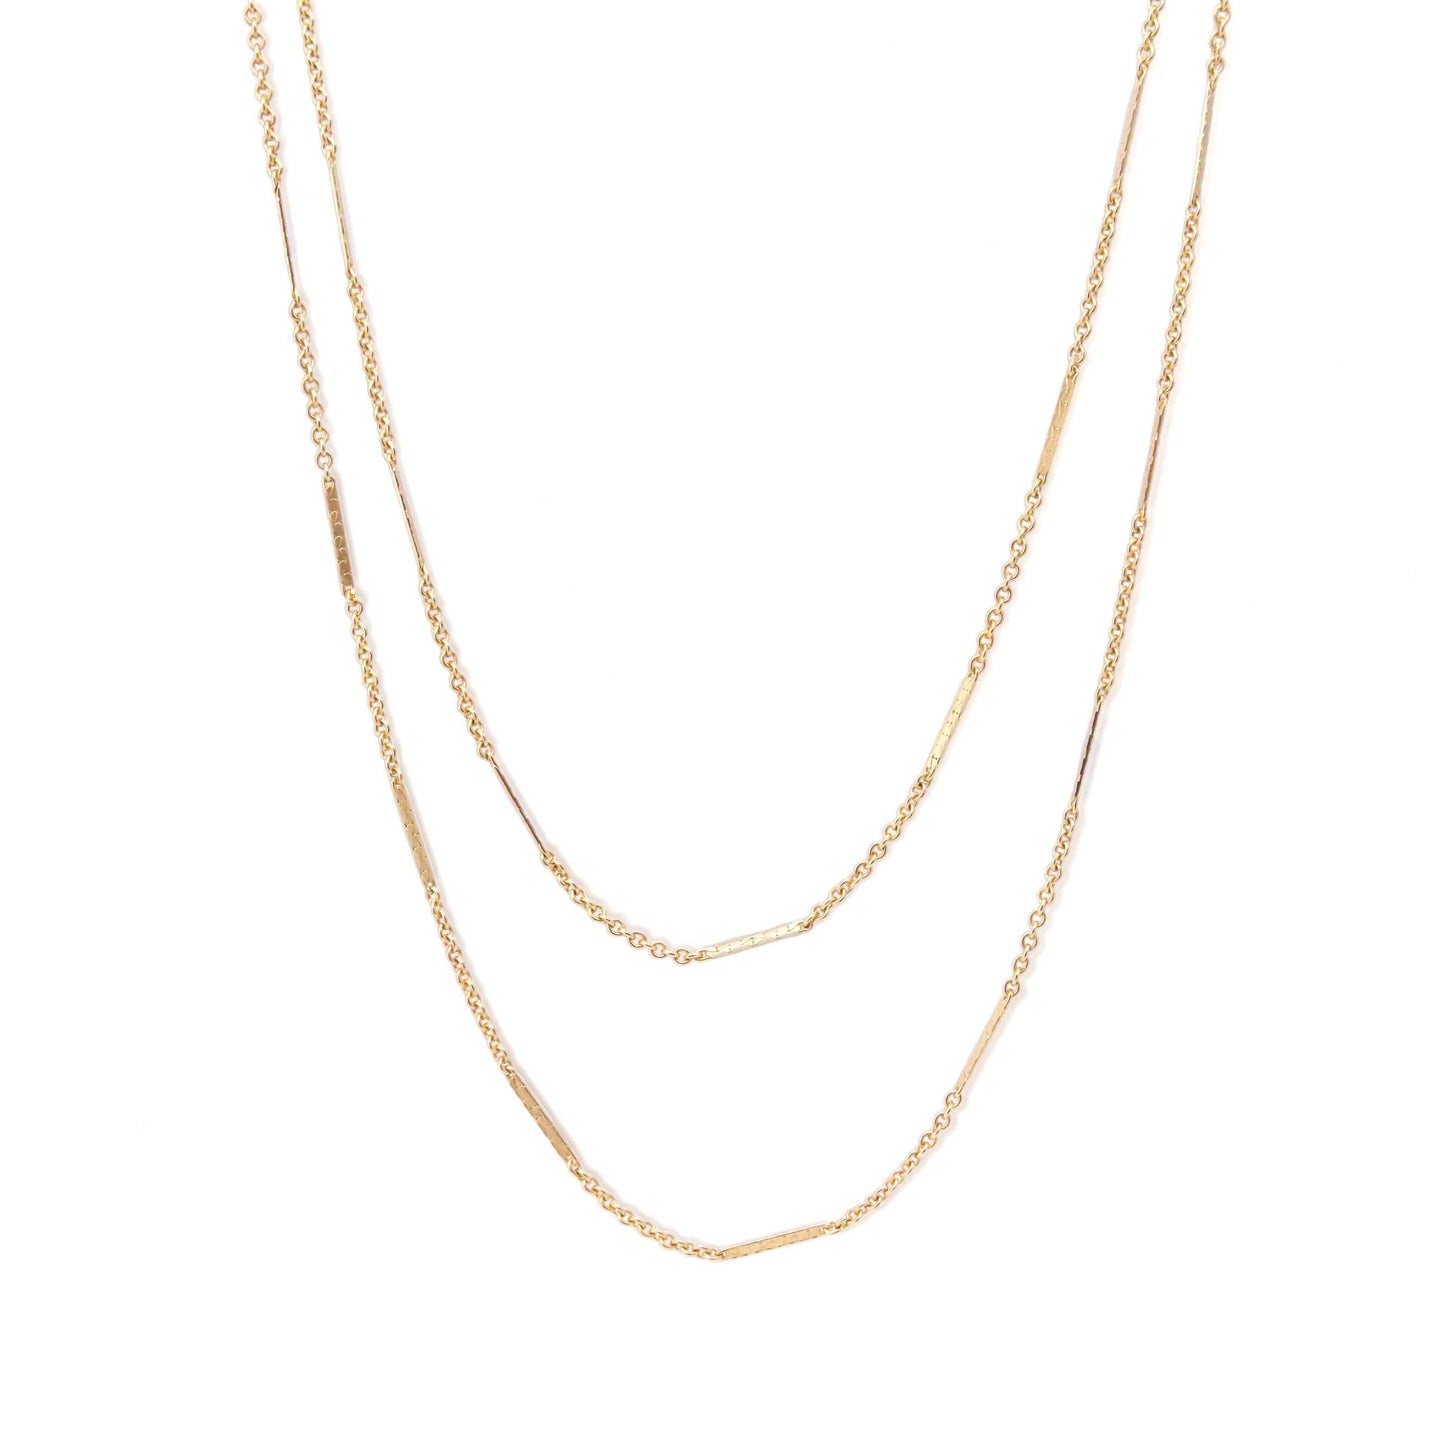 VUE by SEK LLC Necklaces the double layered chain necklace